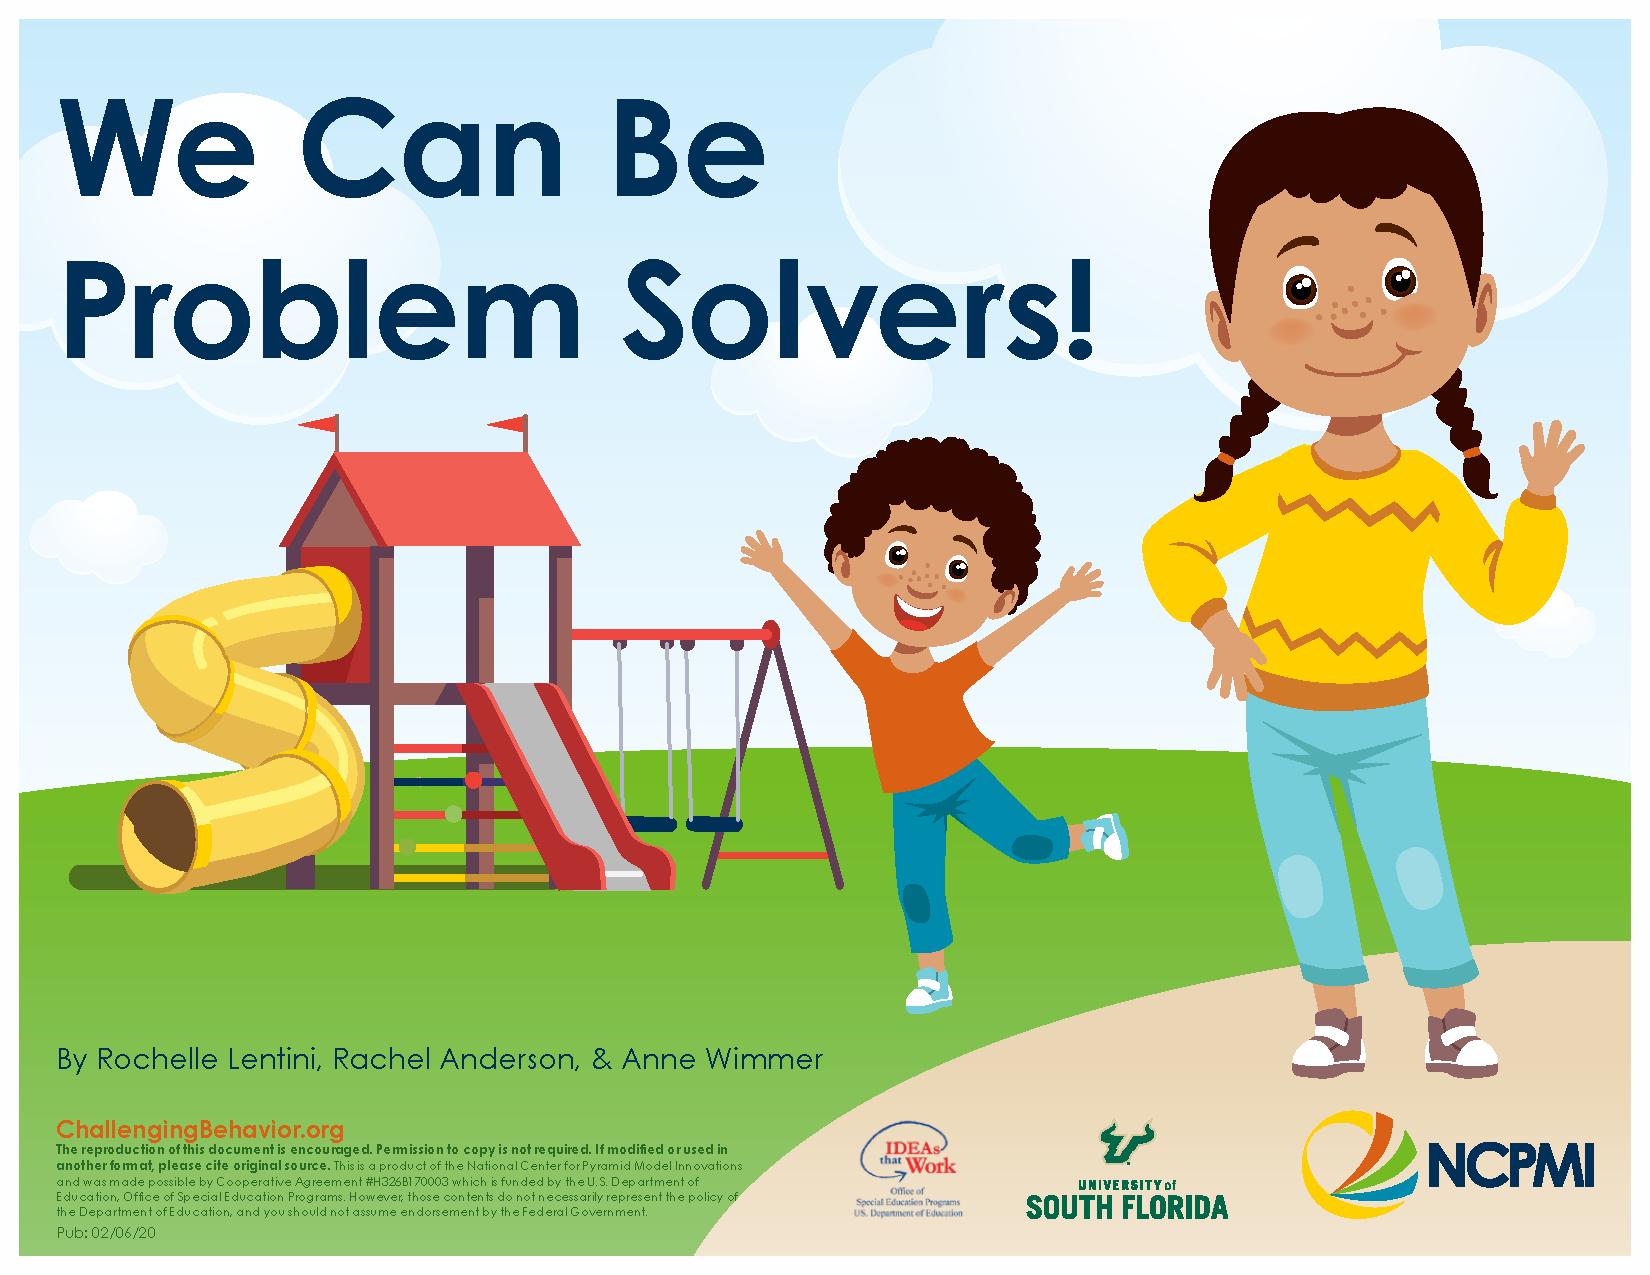 We Can Be Problem Solvers!